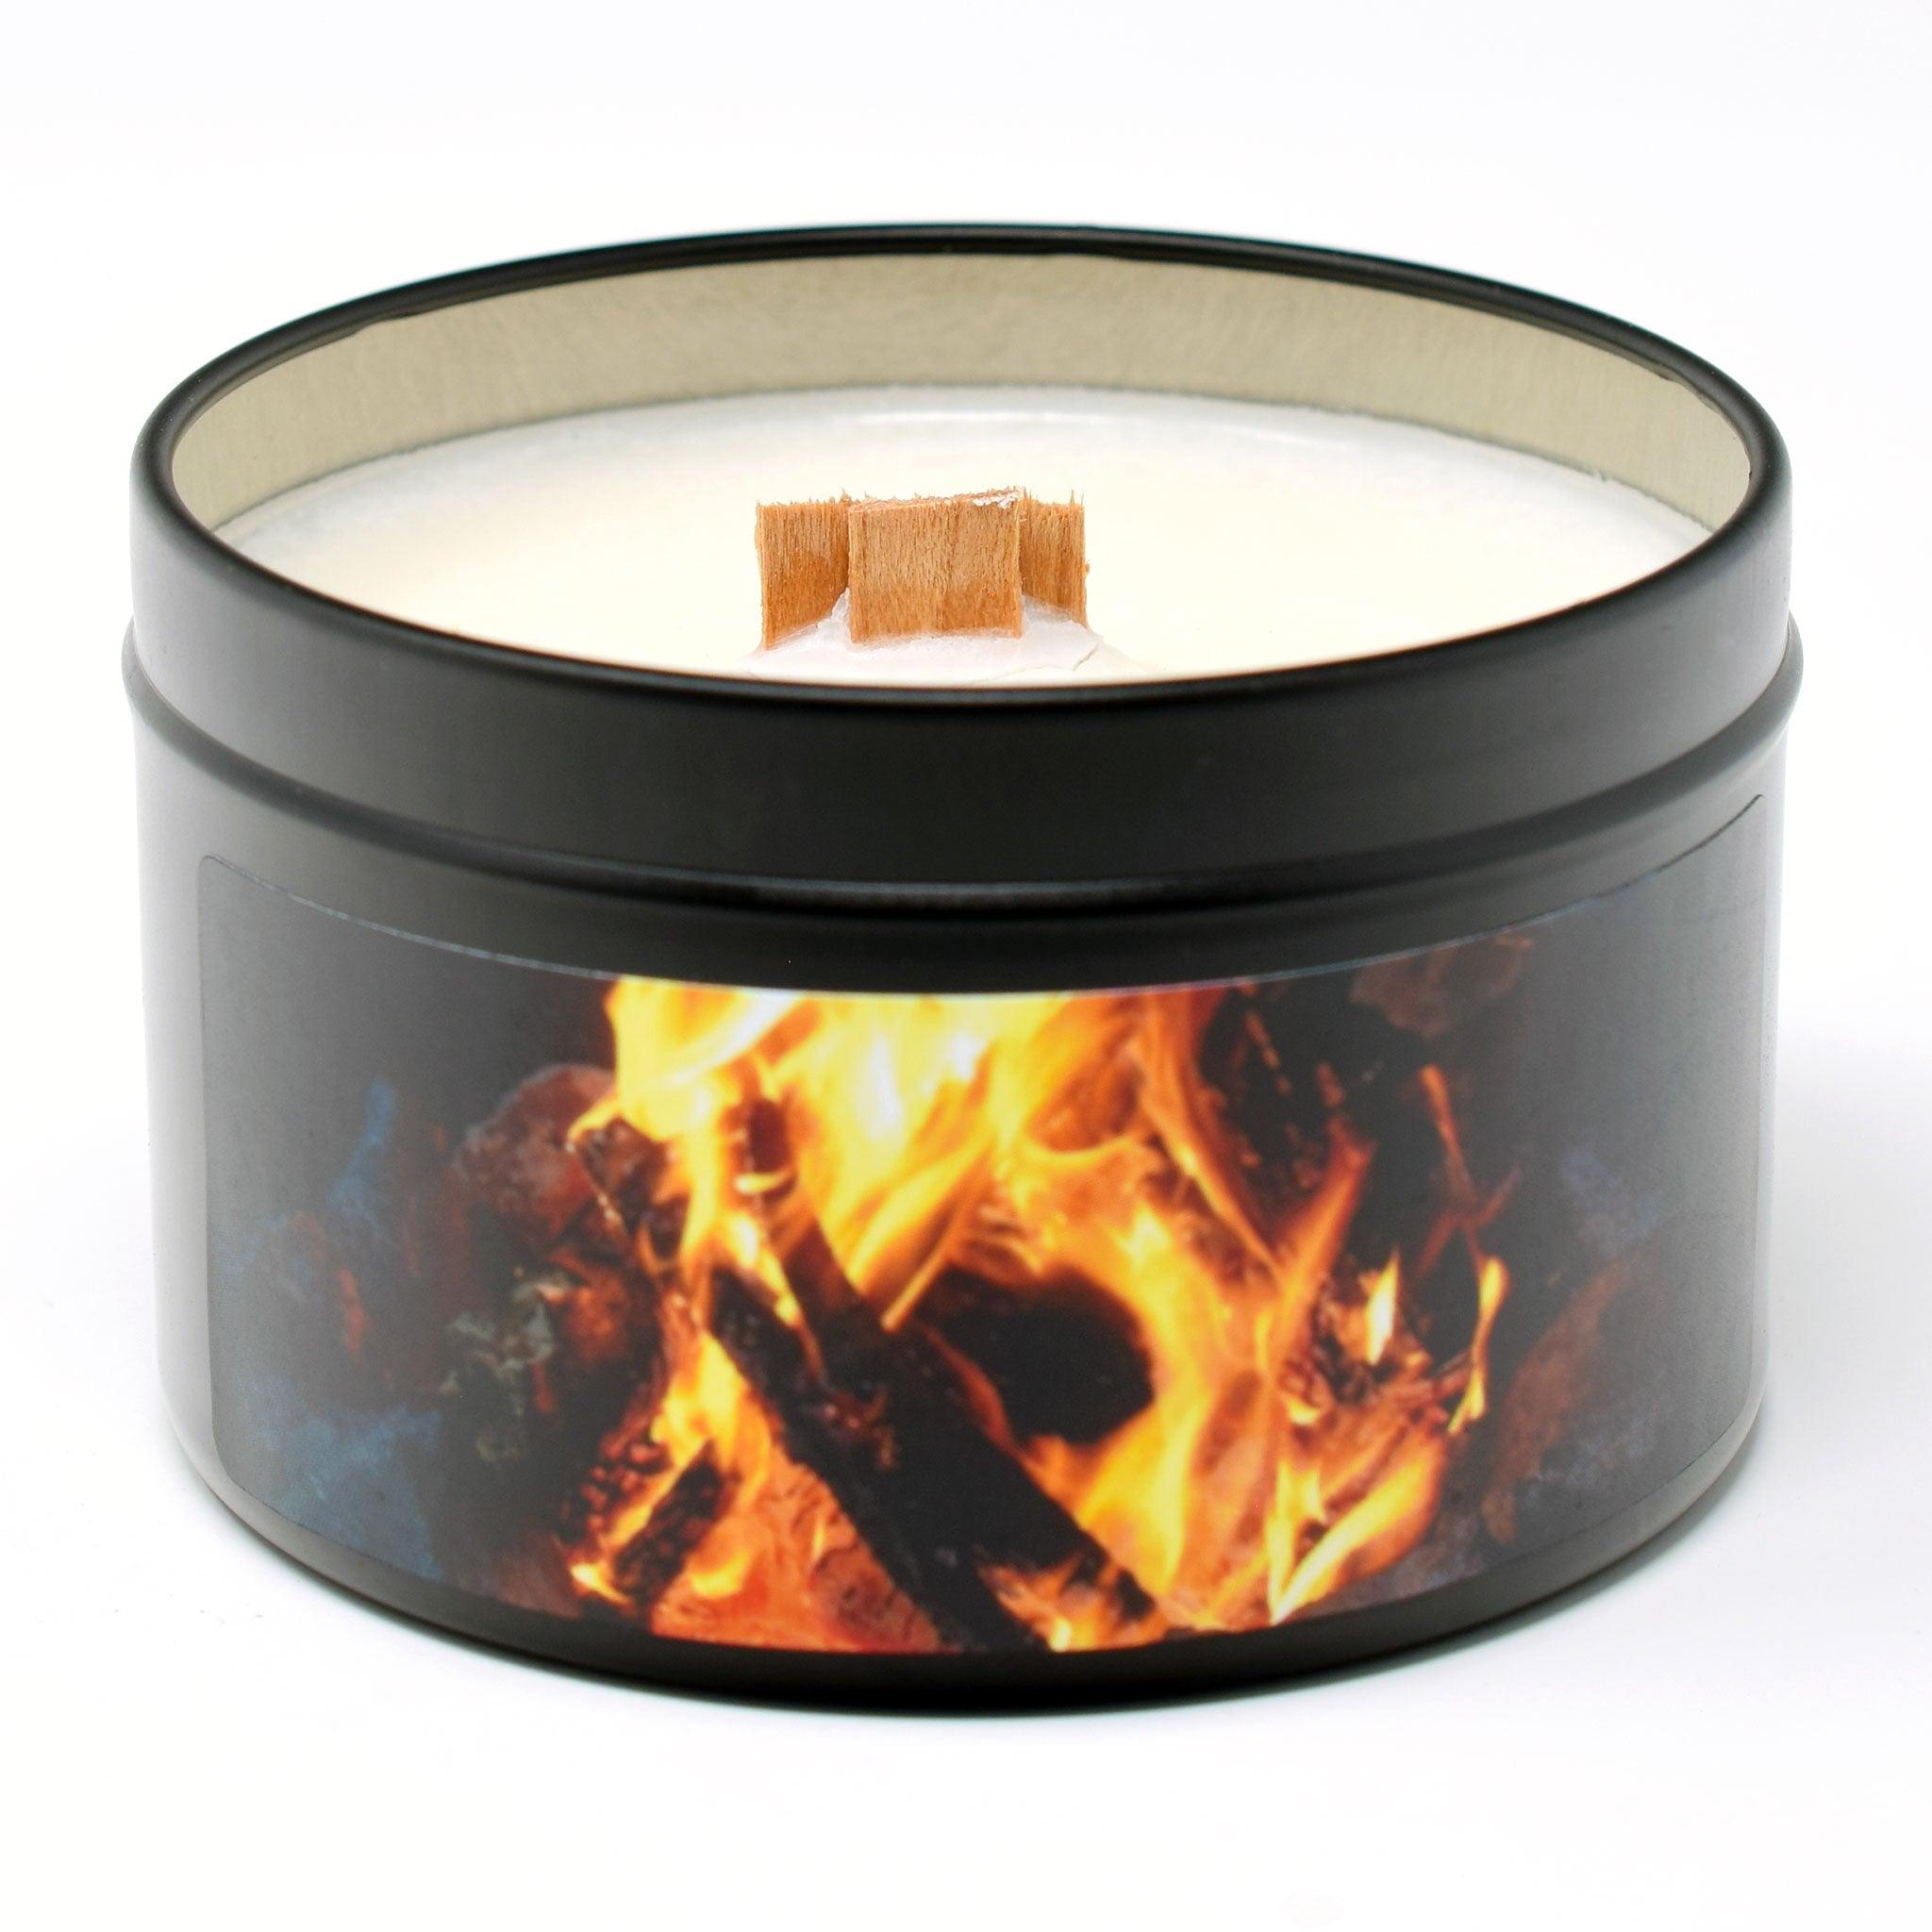 Citronella Campfire Candle, Soy/Beeswax Blend, Wood Wick, 6oz Black Tin - Candeo Candle